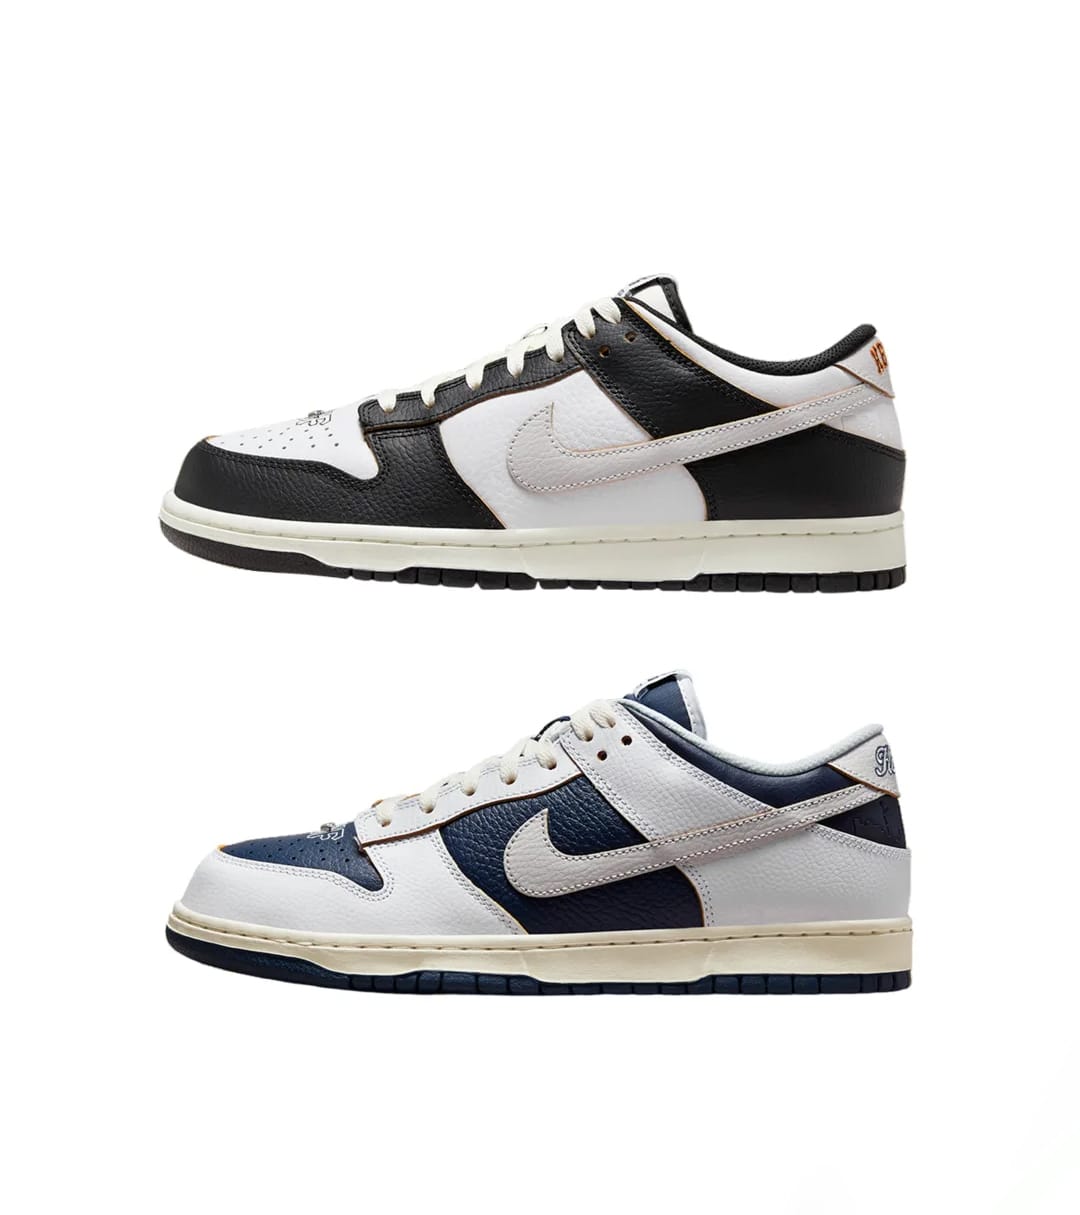 Nike Sb Dunk Low Huf Sf Or Huf Ny Fd8775 001 Or Fd8775 100 Release Date 